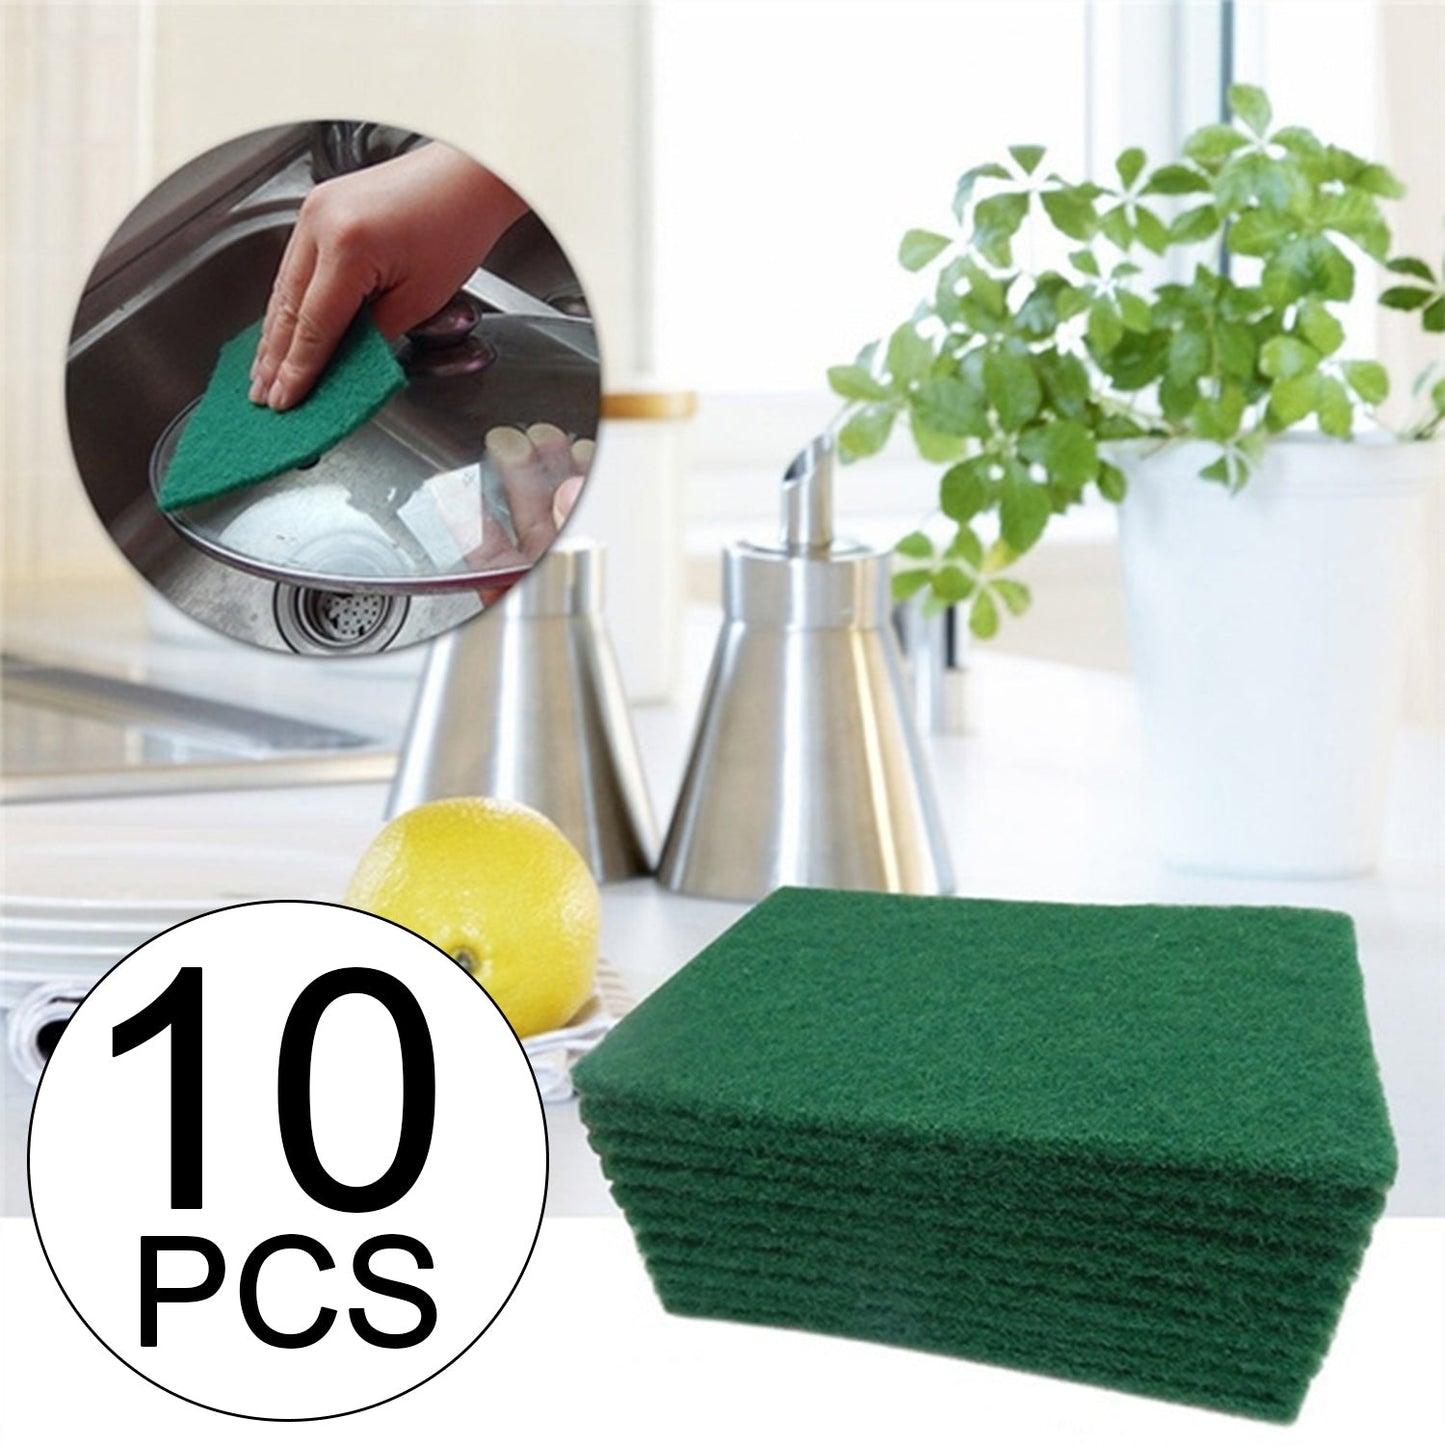 1495 Green Kitchen Scrubber Pads for Utensils/Tiles Cleaning 